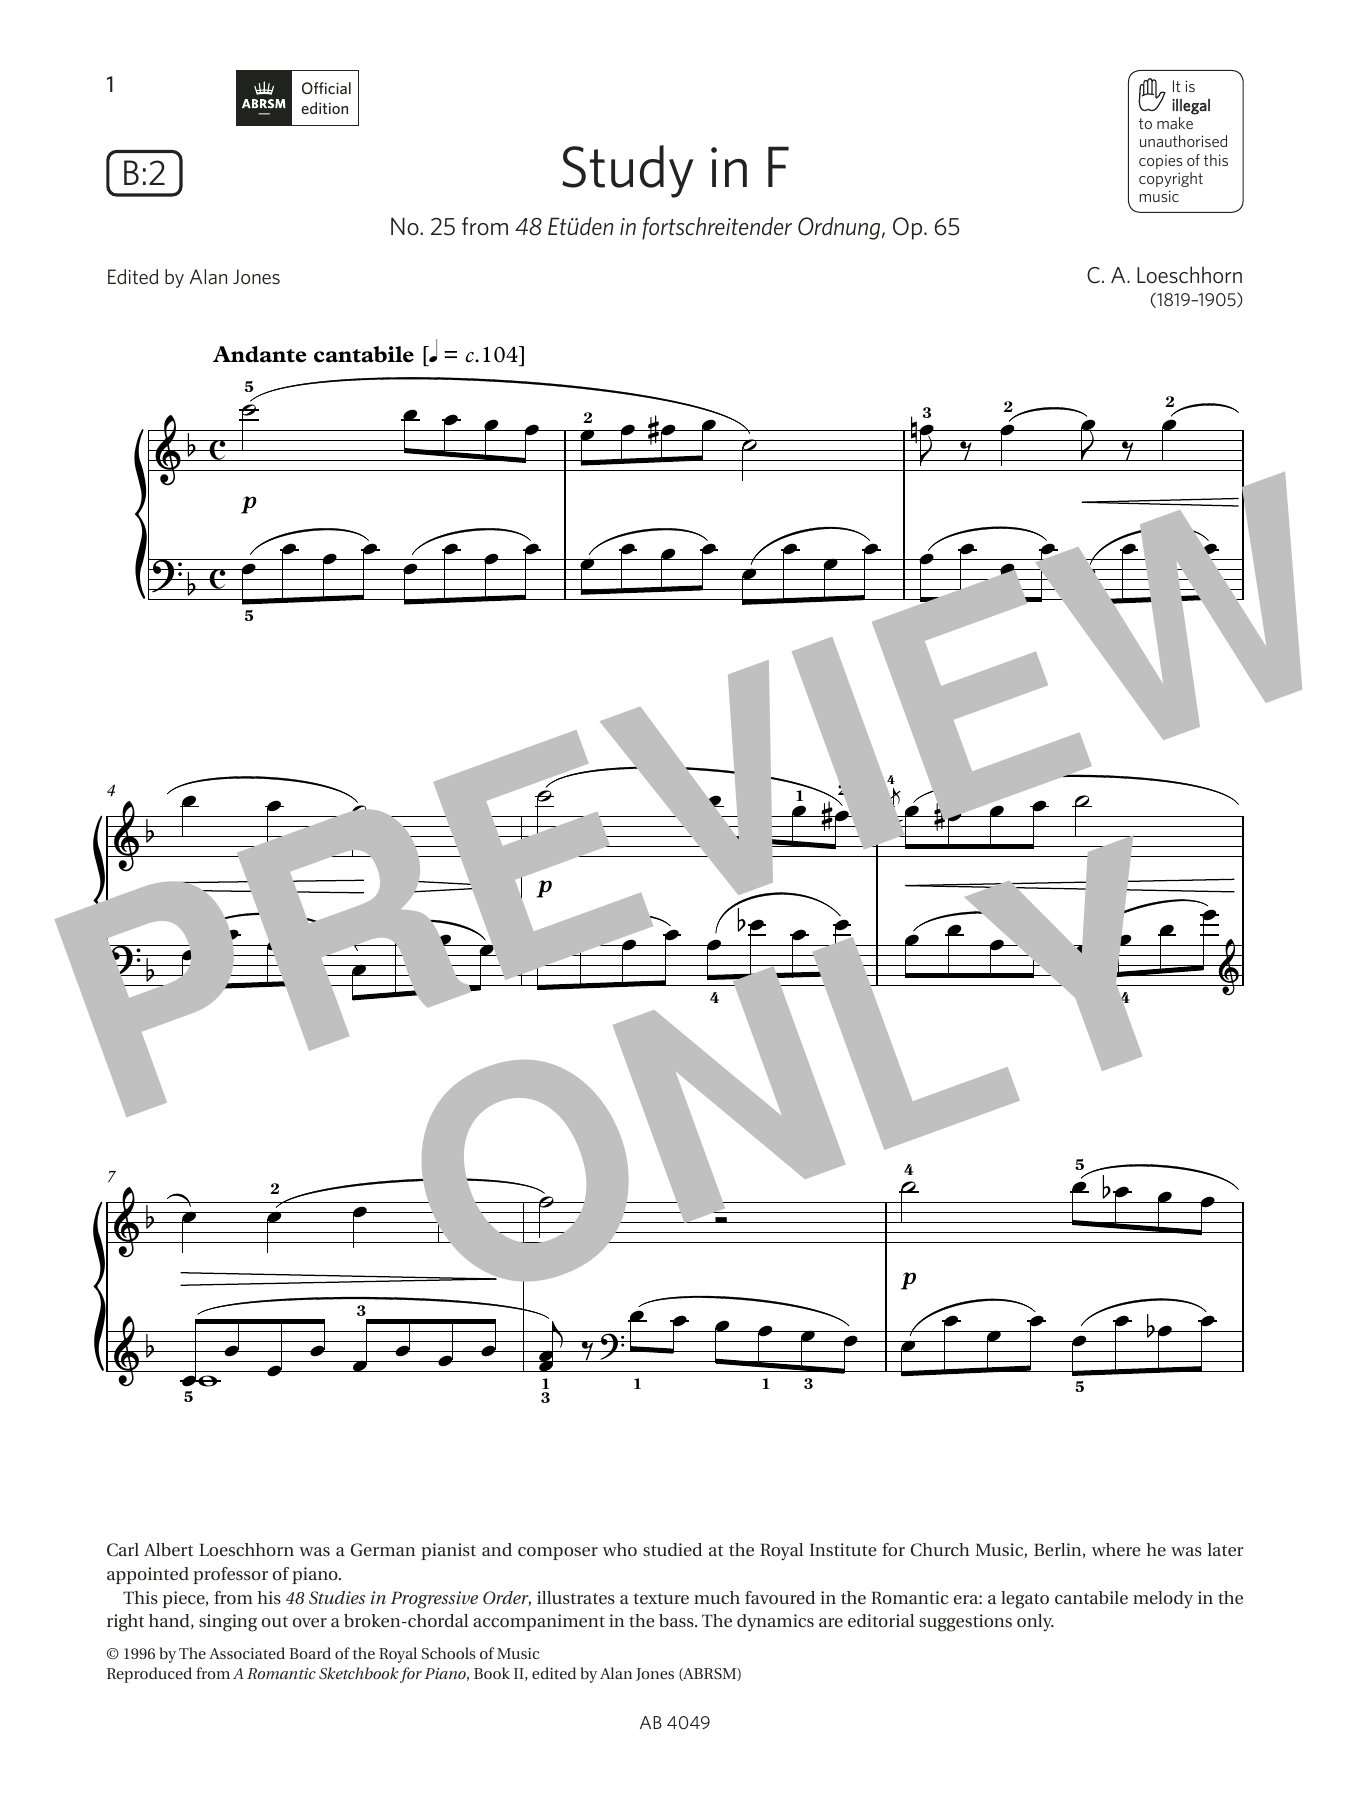 Download C A Loeschhorn Study in F (Grade 3, list B2, from the Sheet Music